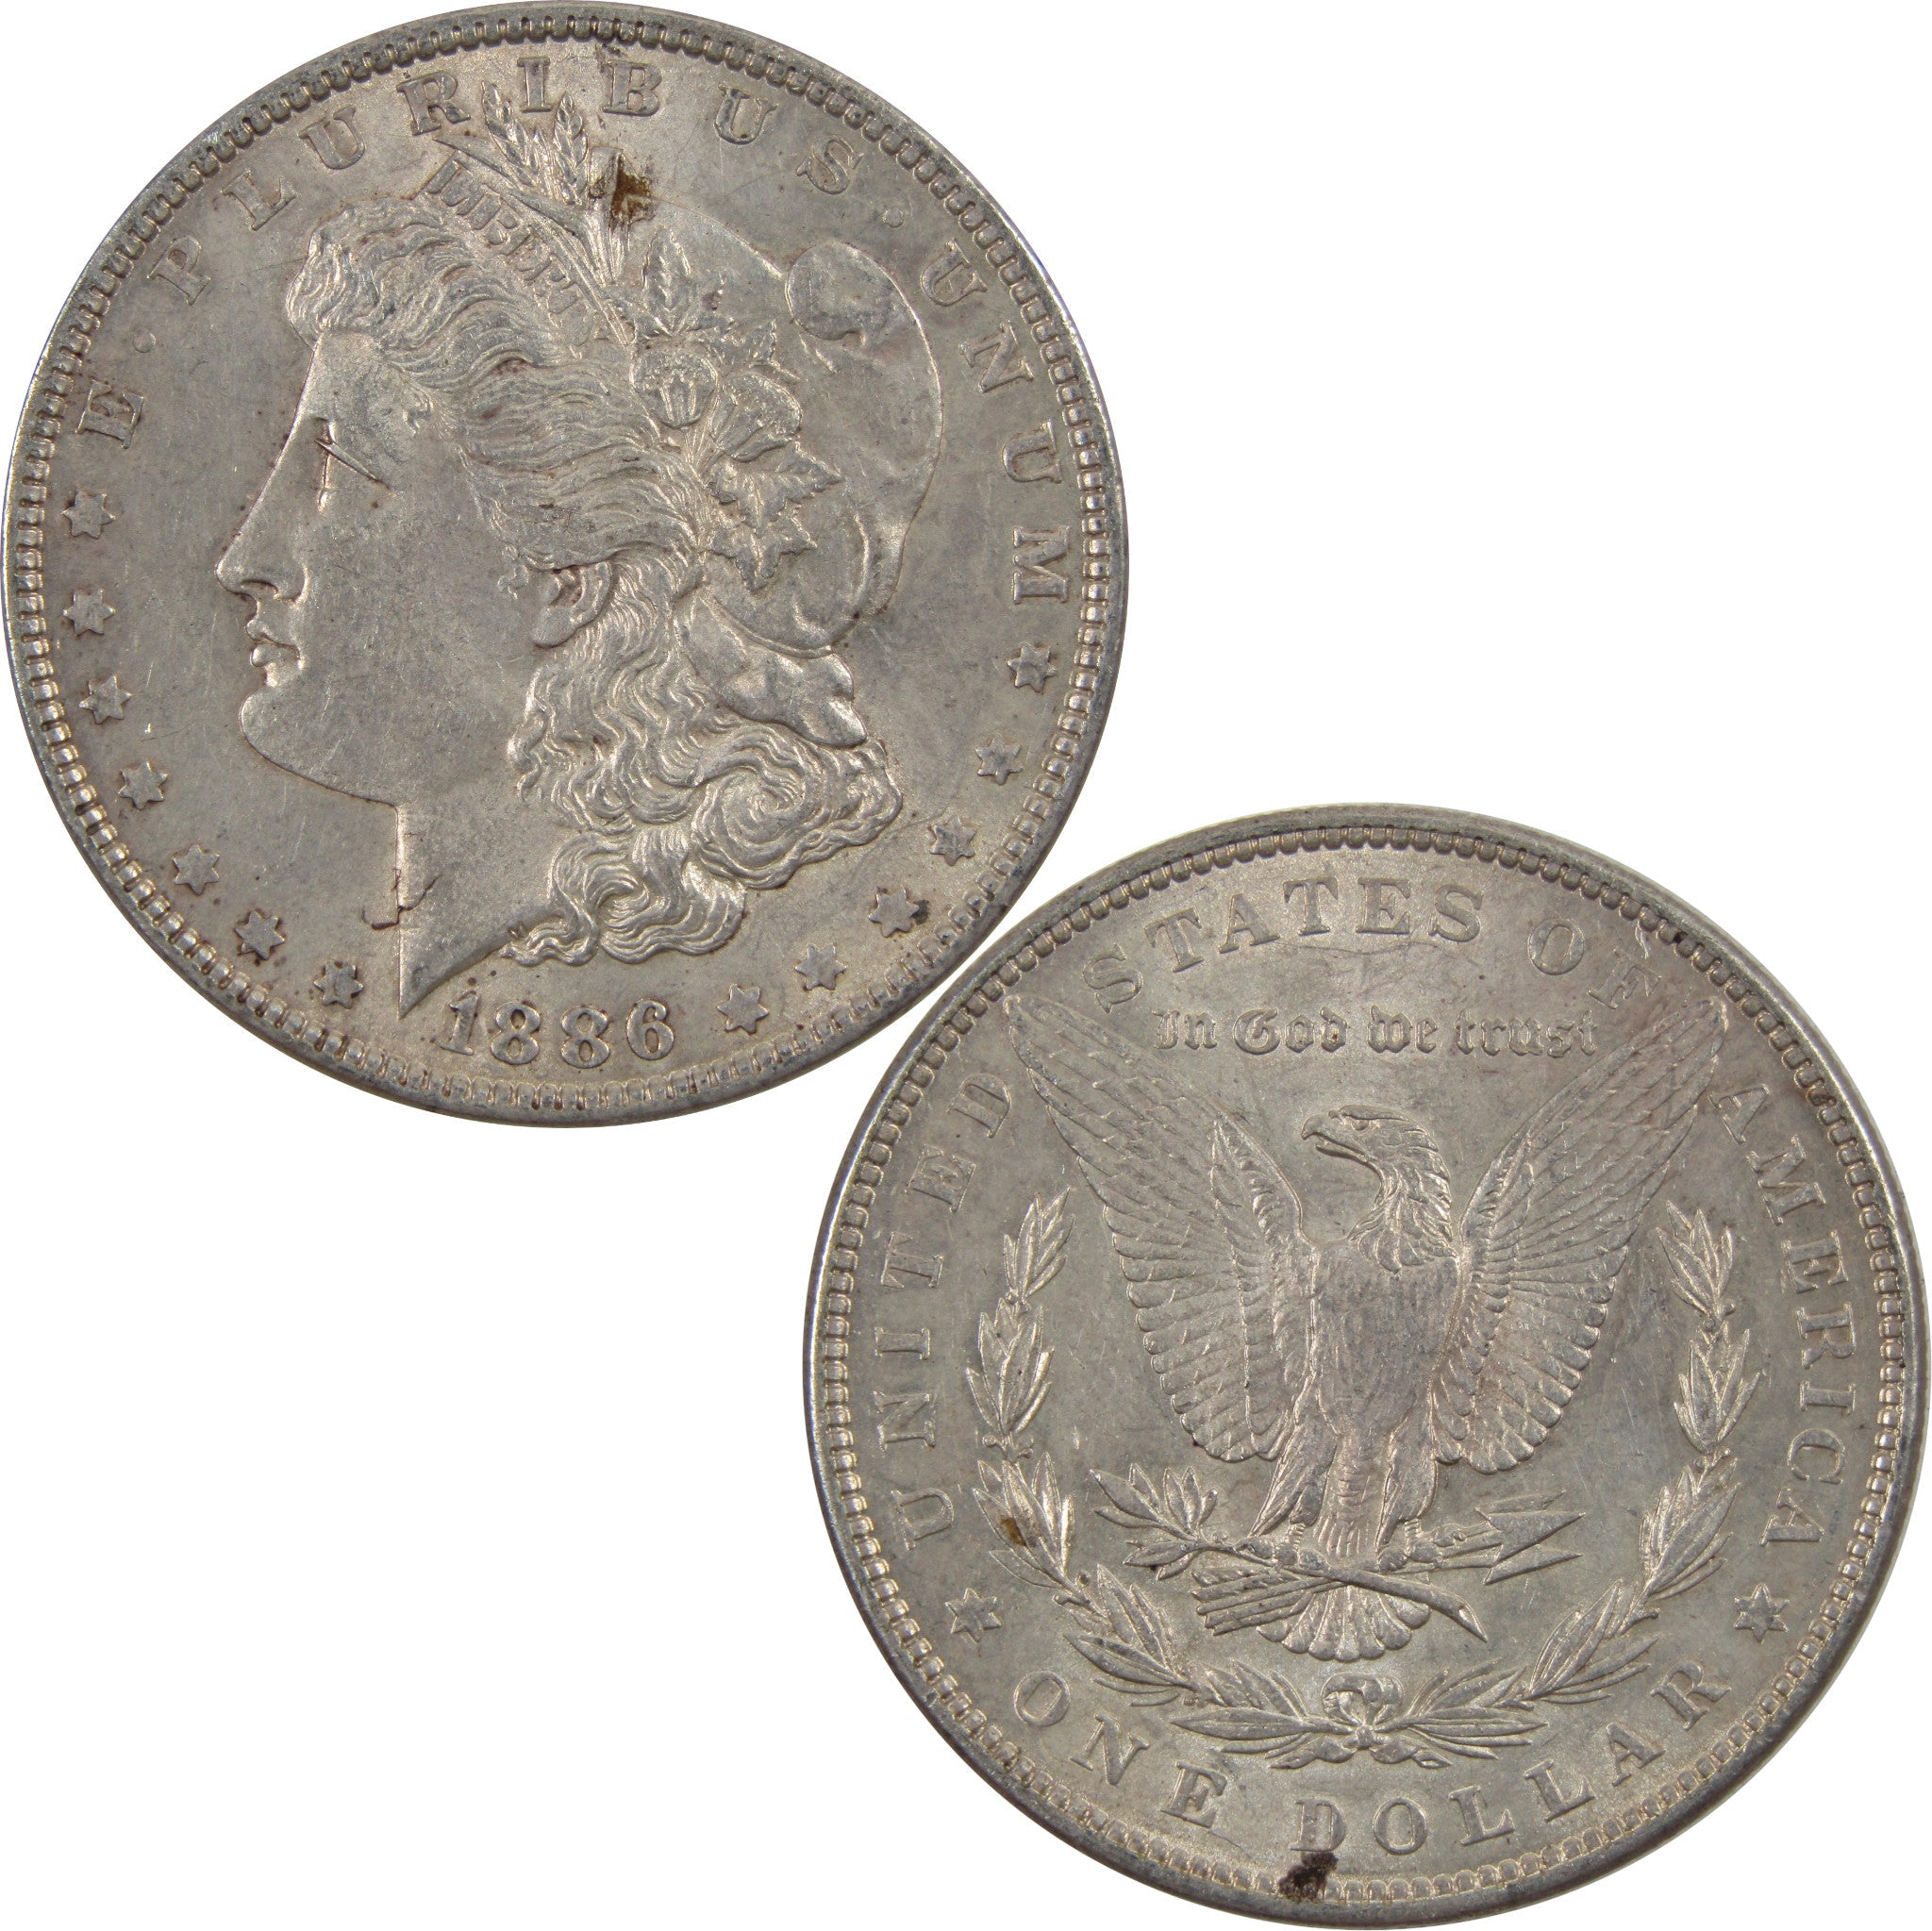 1886 Morgan Dollar AU About Uncirculated 90% Silver $1 Coin SKU:I5487 - Morgan coin - Morgan silver dollar - Morgan silver dollar for sale - Profile Coins &amp; Collectibles